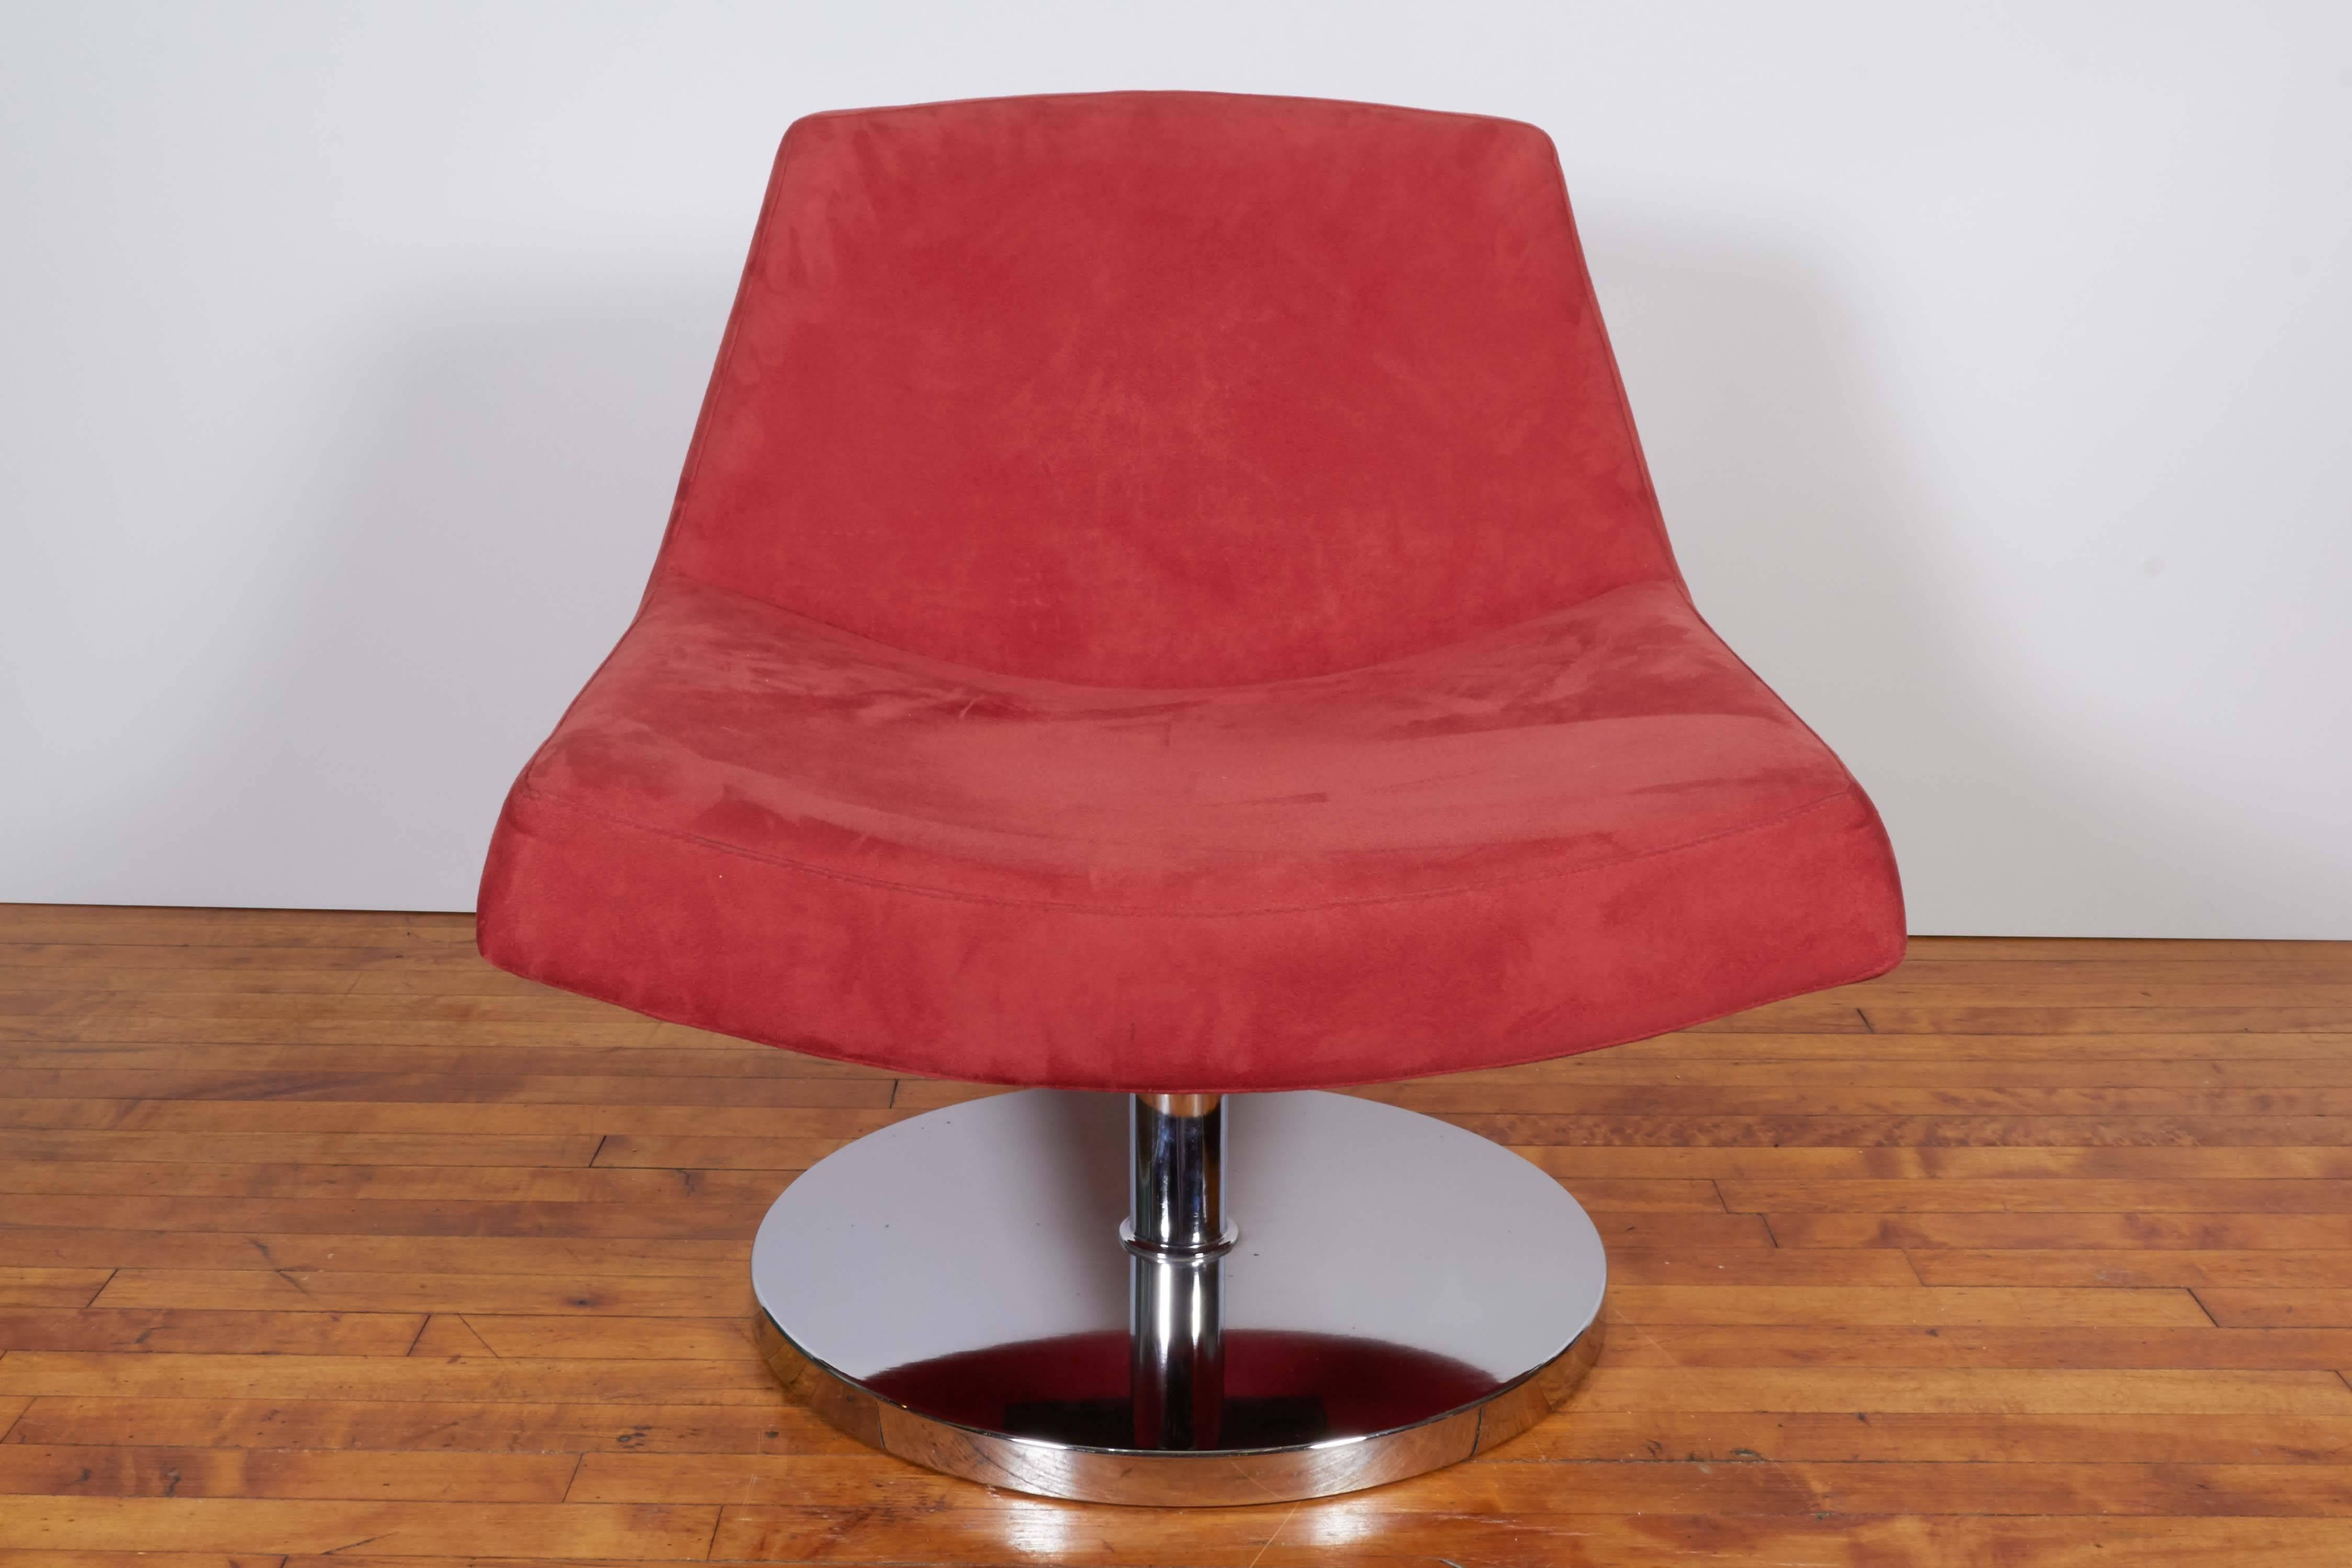 A pair of modern style slipper chairs, produced circa late 20th century, with cushioned seat and back entirely upholstered in red suede, raised on pedestal swivel circular base in polished chrome. Very good condition, with age appropriate wear to